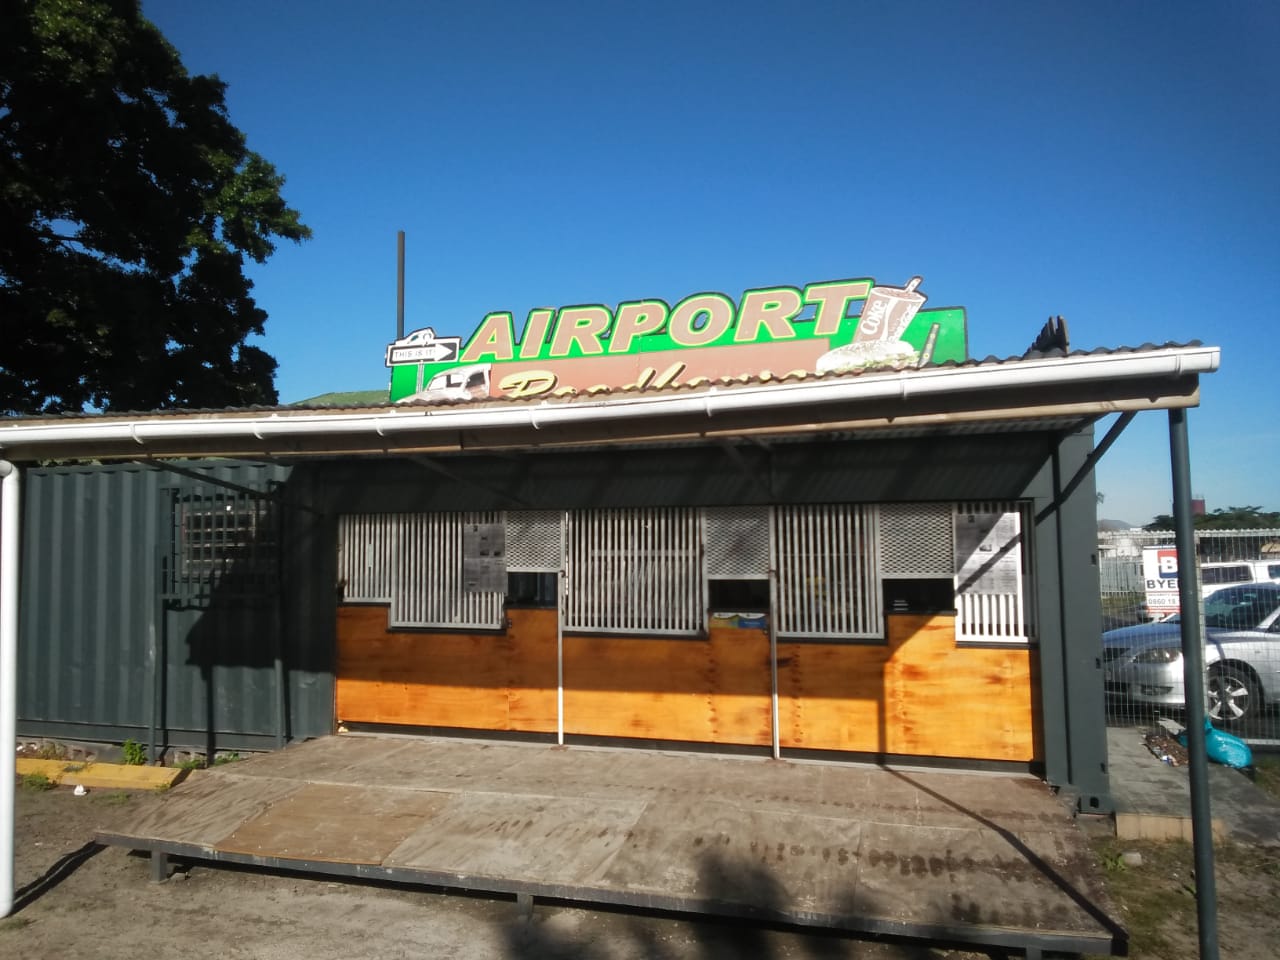 Airport Roadhouse